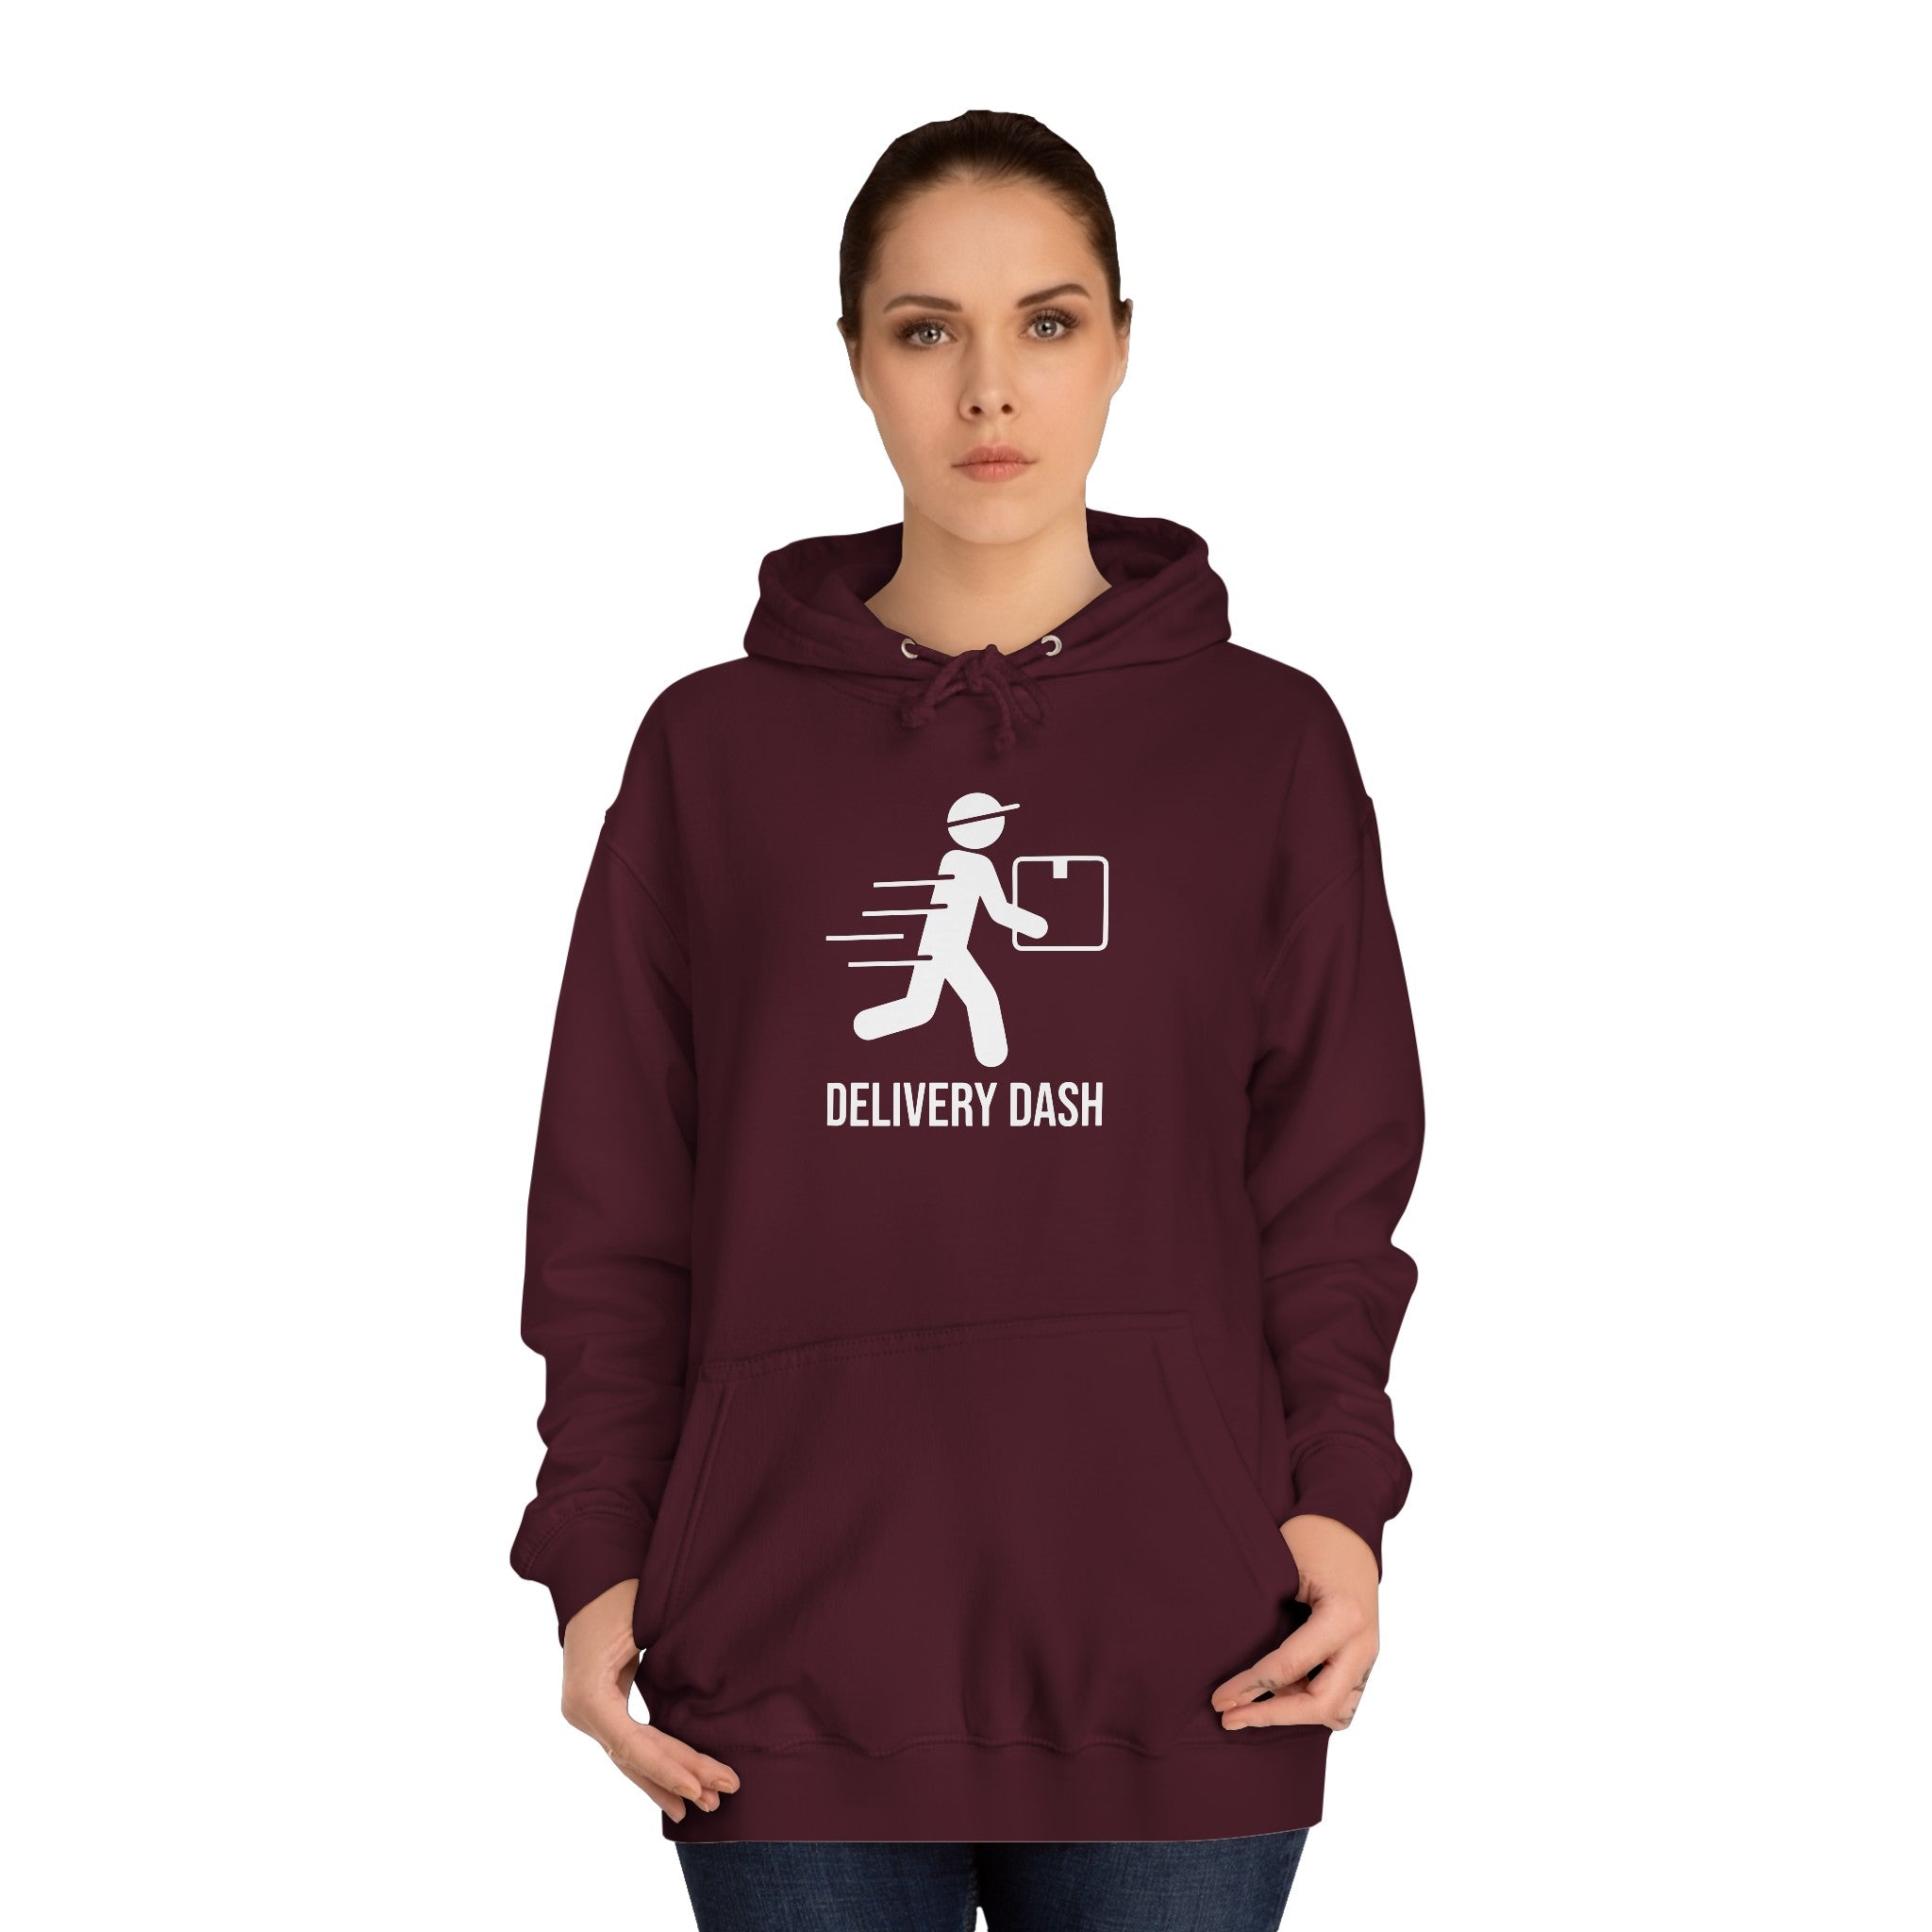 Delivery Dash - Unisex College Hoodie